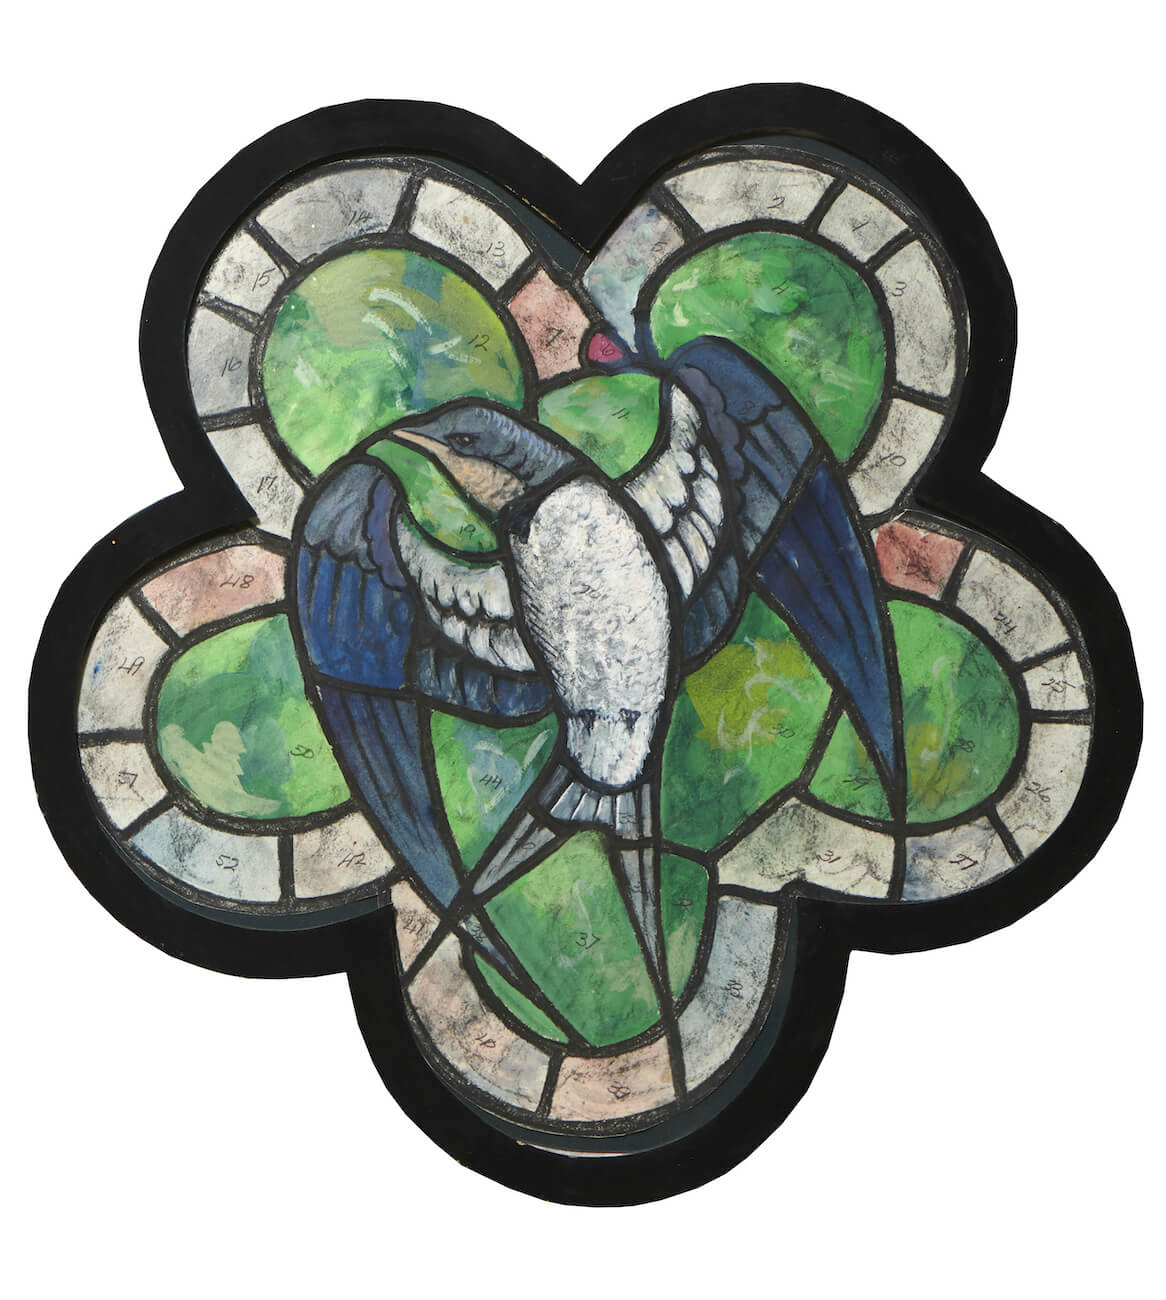 Edward Irvine Halliday - Stained glass window design with Swallow